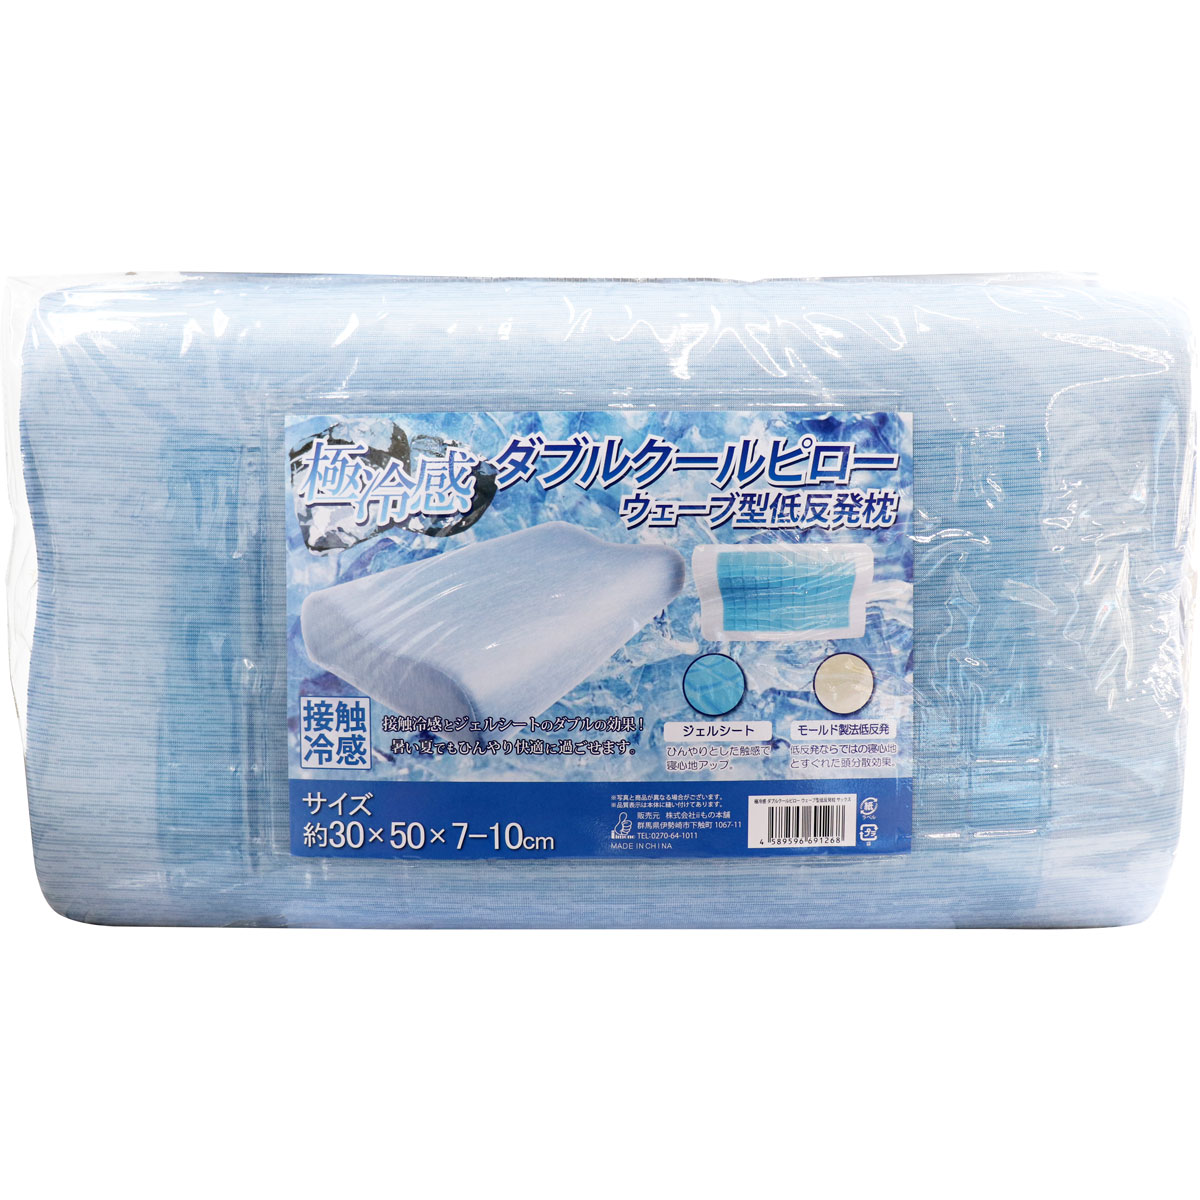 Picture of Saxe Blue color Touch Fabric Cooling Memory Foam Wave Type Pillow